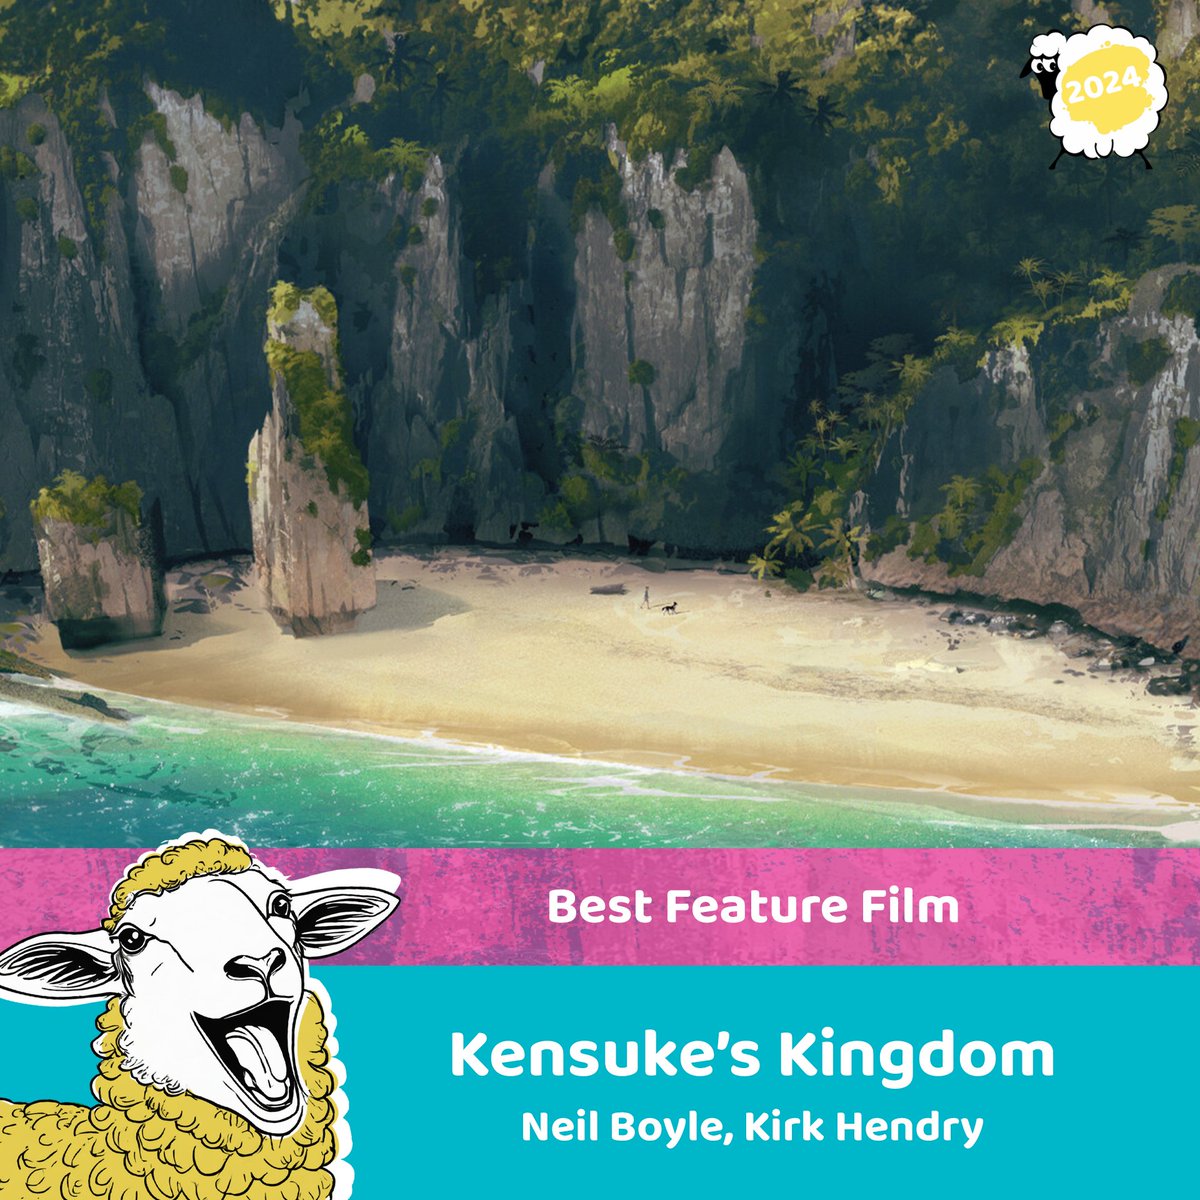 Best Feature Film goes to Kensuke’s Kingdom - well done to the whole team! #BAA24